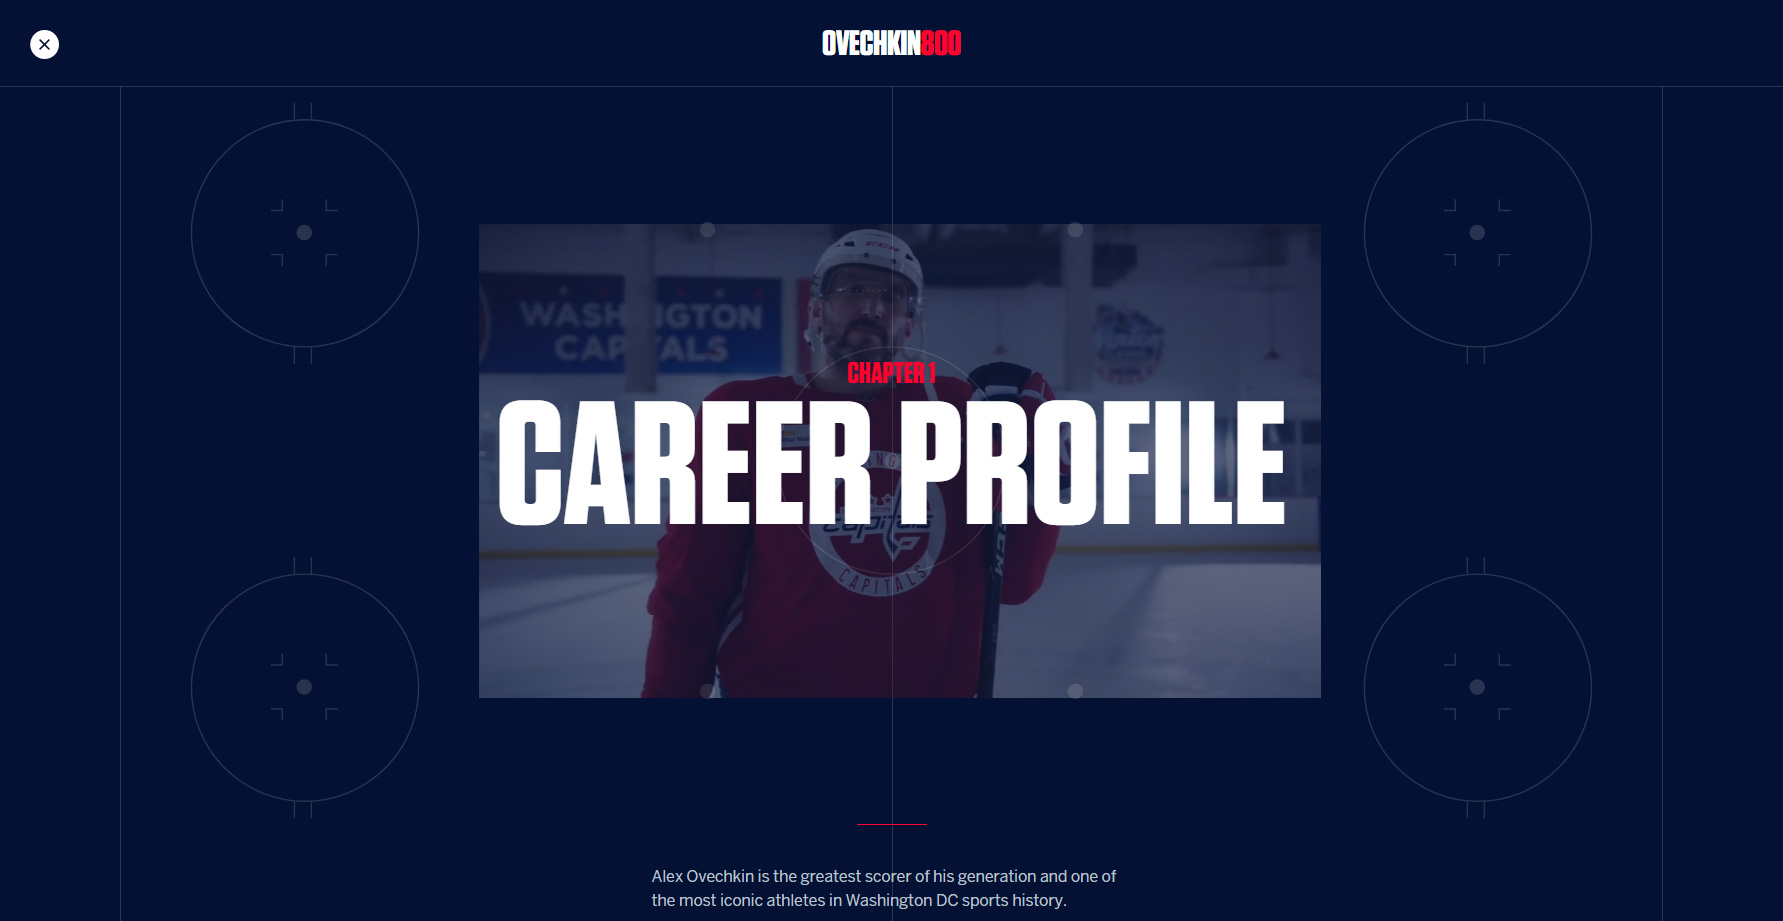 Ovechkin800 - Website of the Day